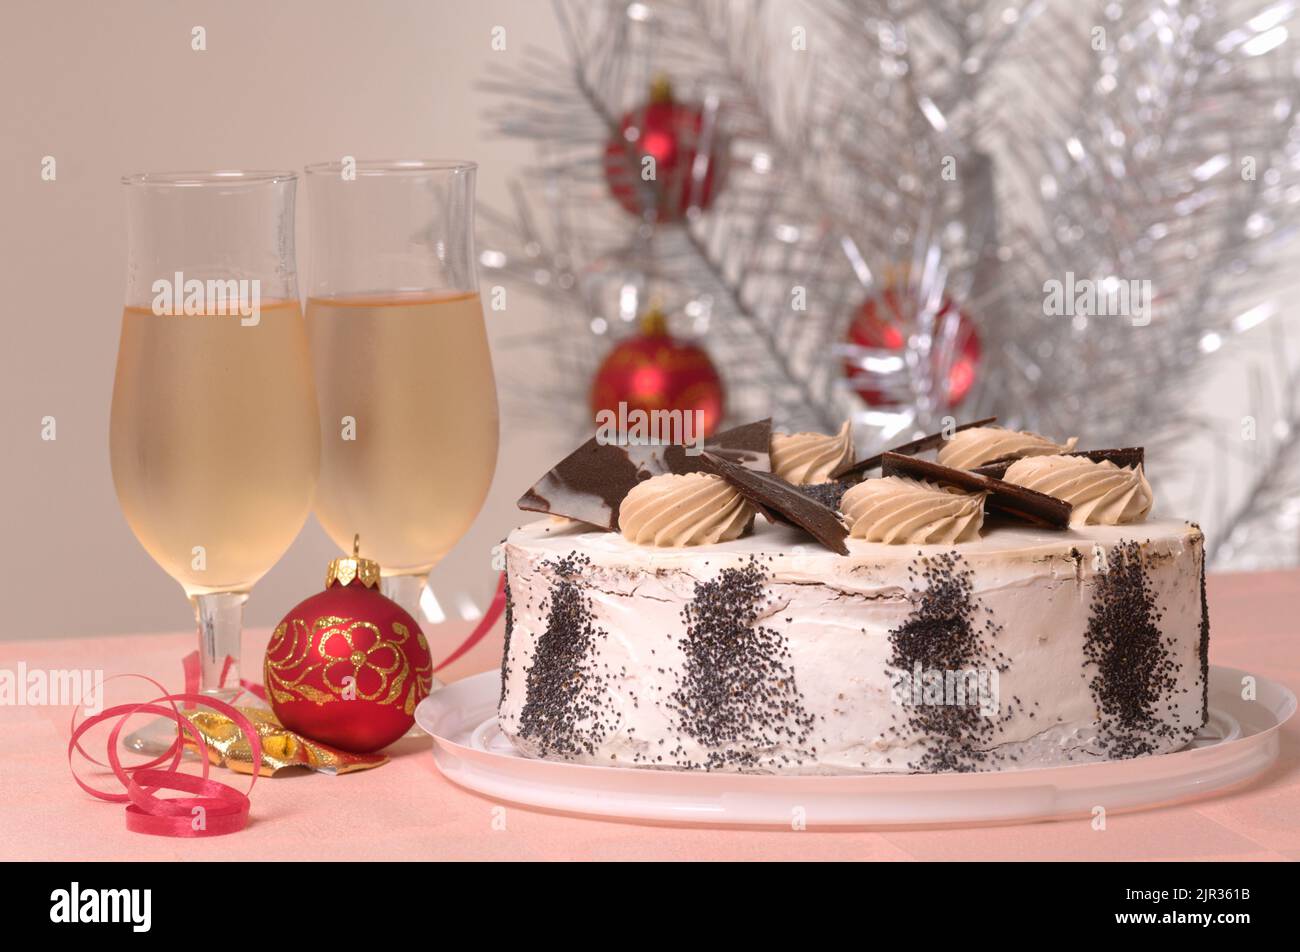 Christmas cake and two glasses of white wine on a Christmas table against decorated silver Christmas tree Stock Photo